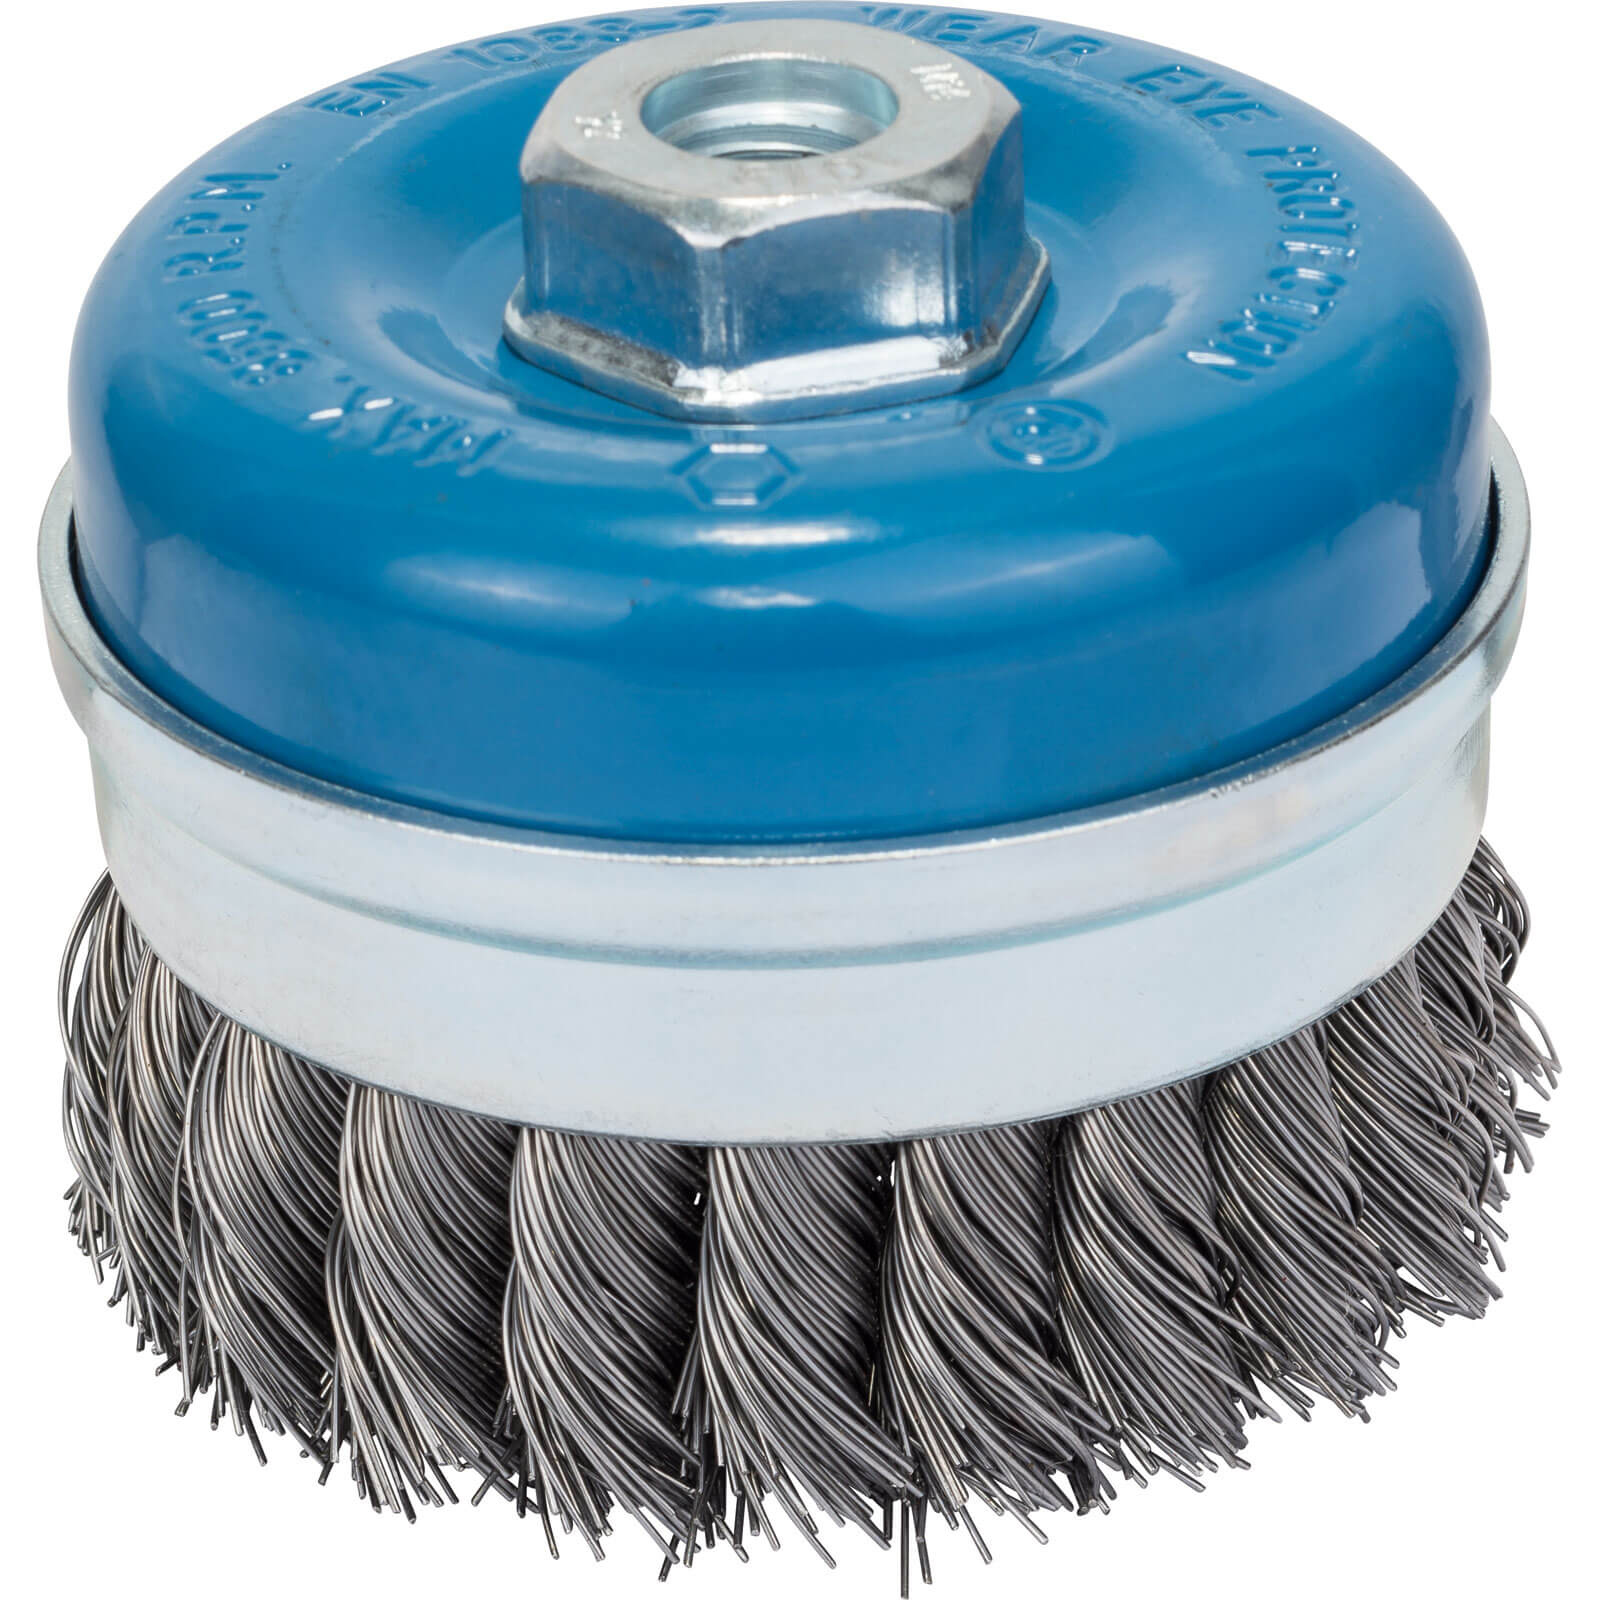 Image of Bosch 0.5mm Knotted Steel Wire Cup Brush 90mm M14 Thread